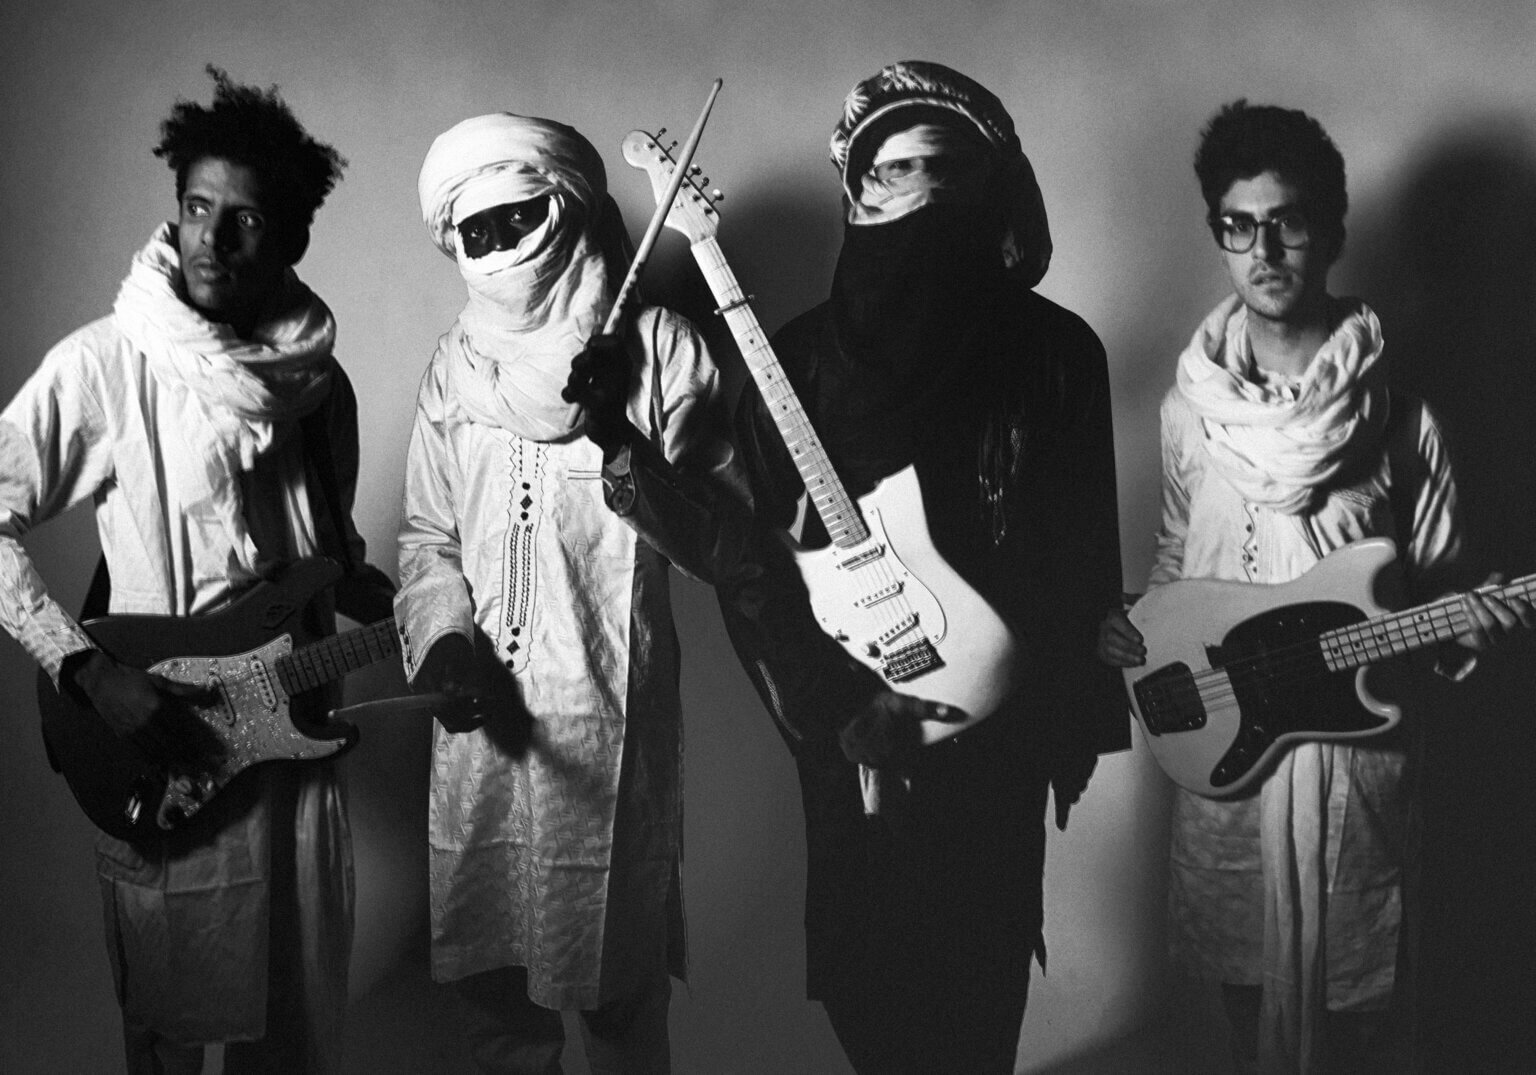 Tuareg guitarist/songwriter Mdou Moctar's music has roots in Tuareg melodicism. Today, Moctar has shared his new single "Chismiten."